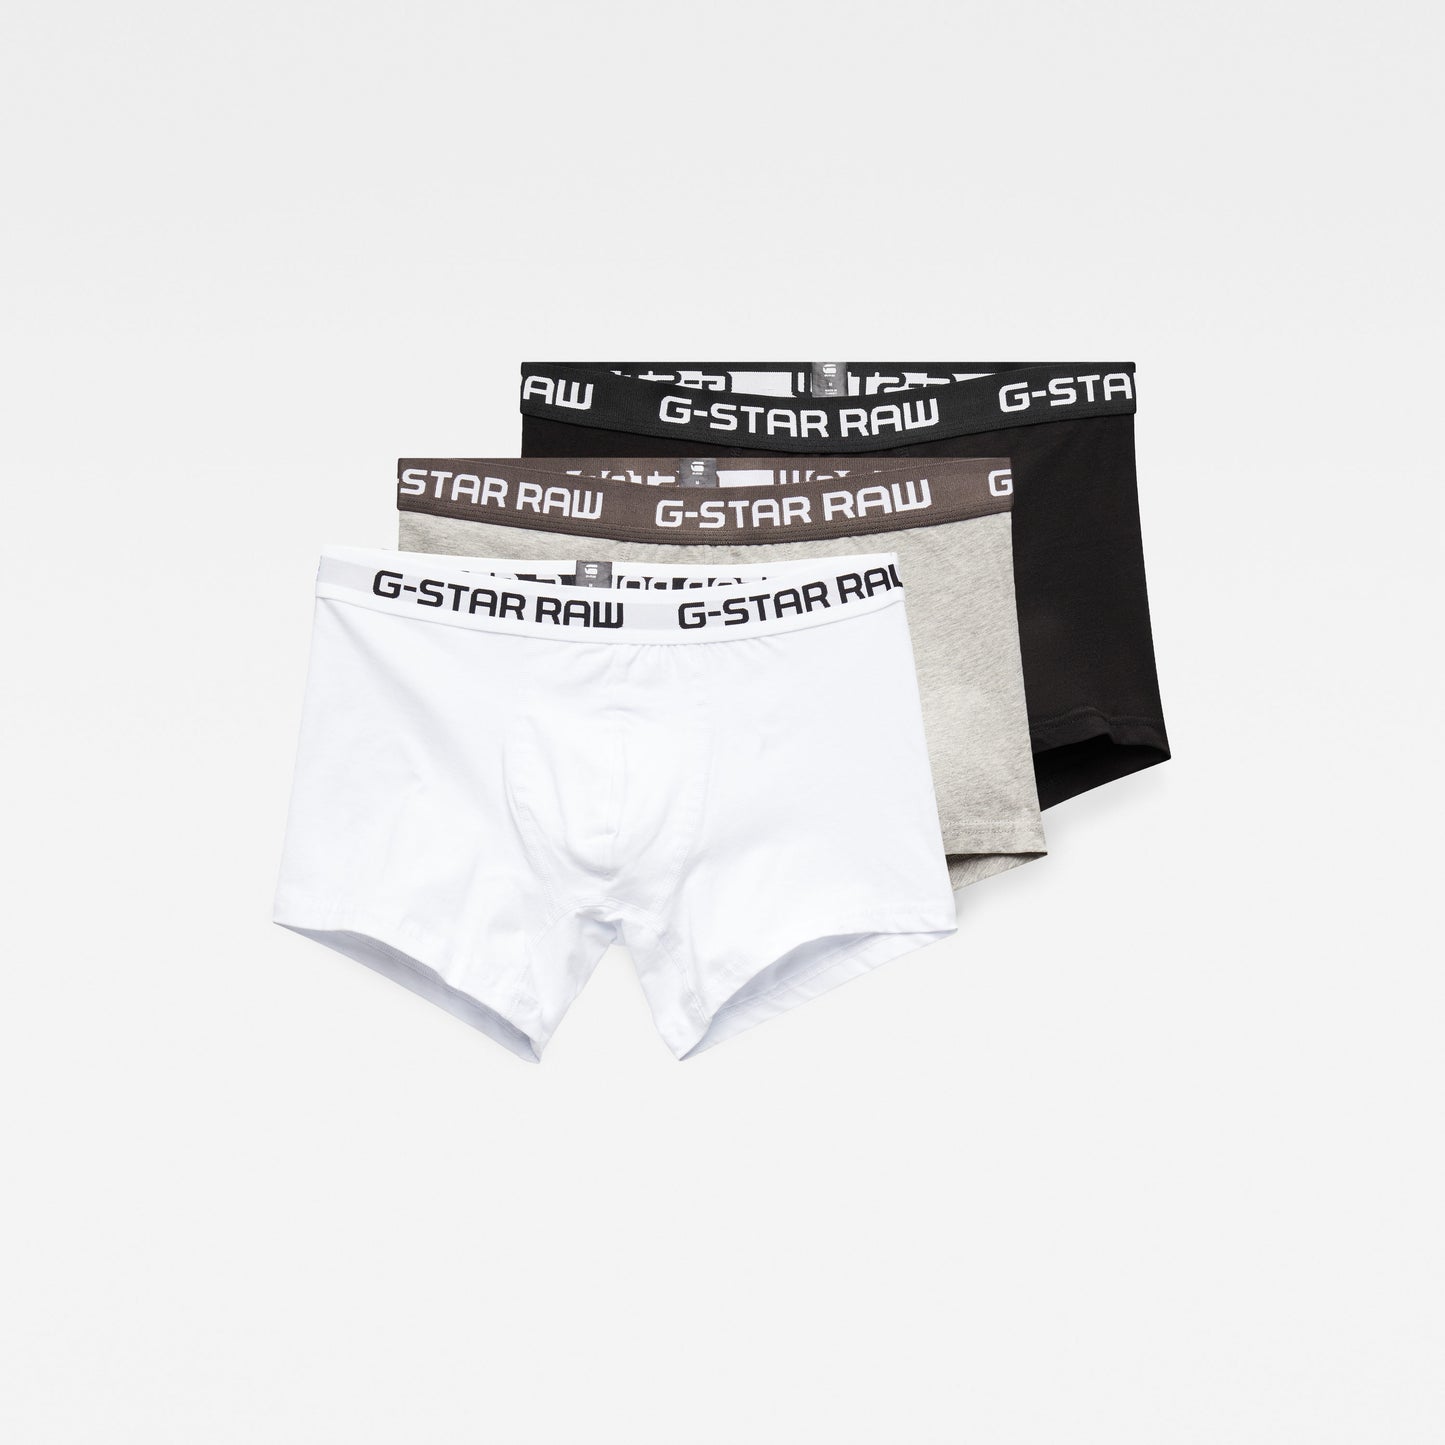 G-Star Classic Greys Boxer Shorts (3 Pack)